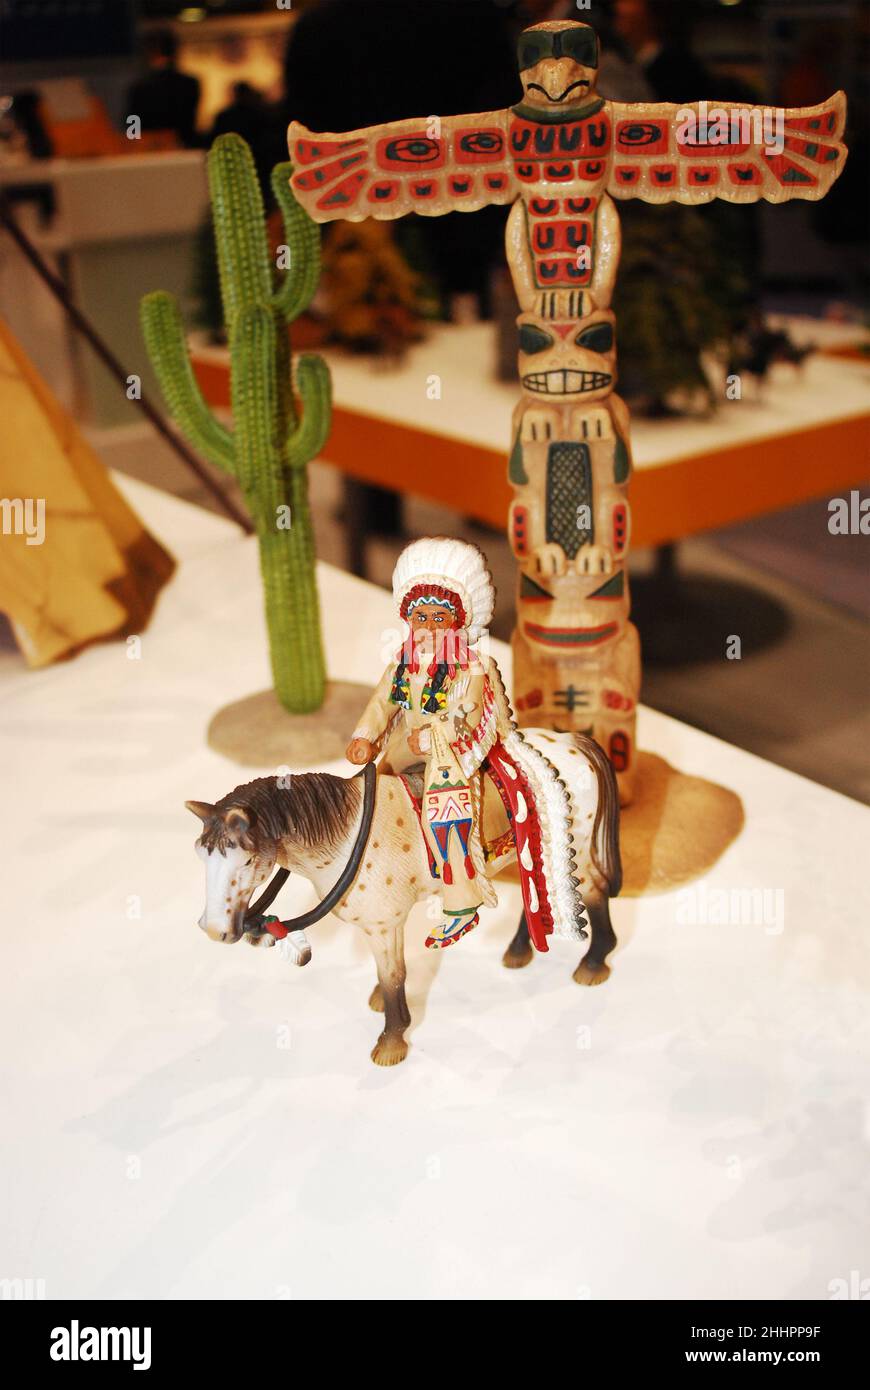 Close-up of Schleich action figure toy of Sioux Chief on appaloosa horse with Western / Native American diorama Collectible Retired Schleich No. 70300 Stock Photo